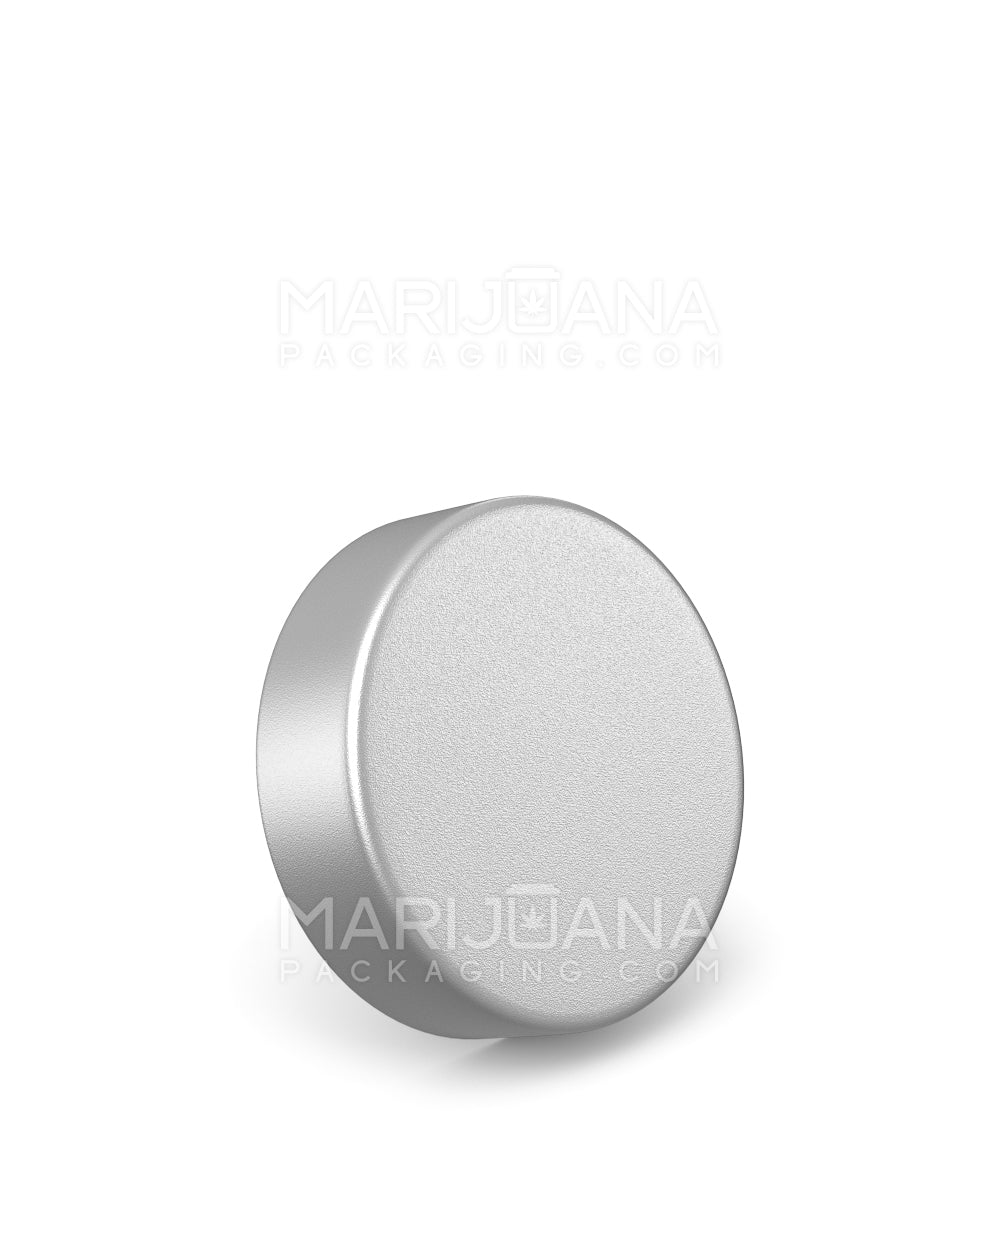 Child Resistant | Smooth Flat Push Down & Turn Plastic Caps w/ Foam Liner | 50mm - Matte Silver - 100 Count - 1